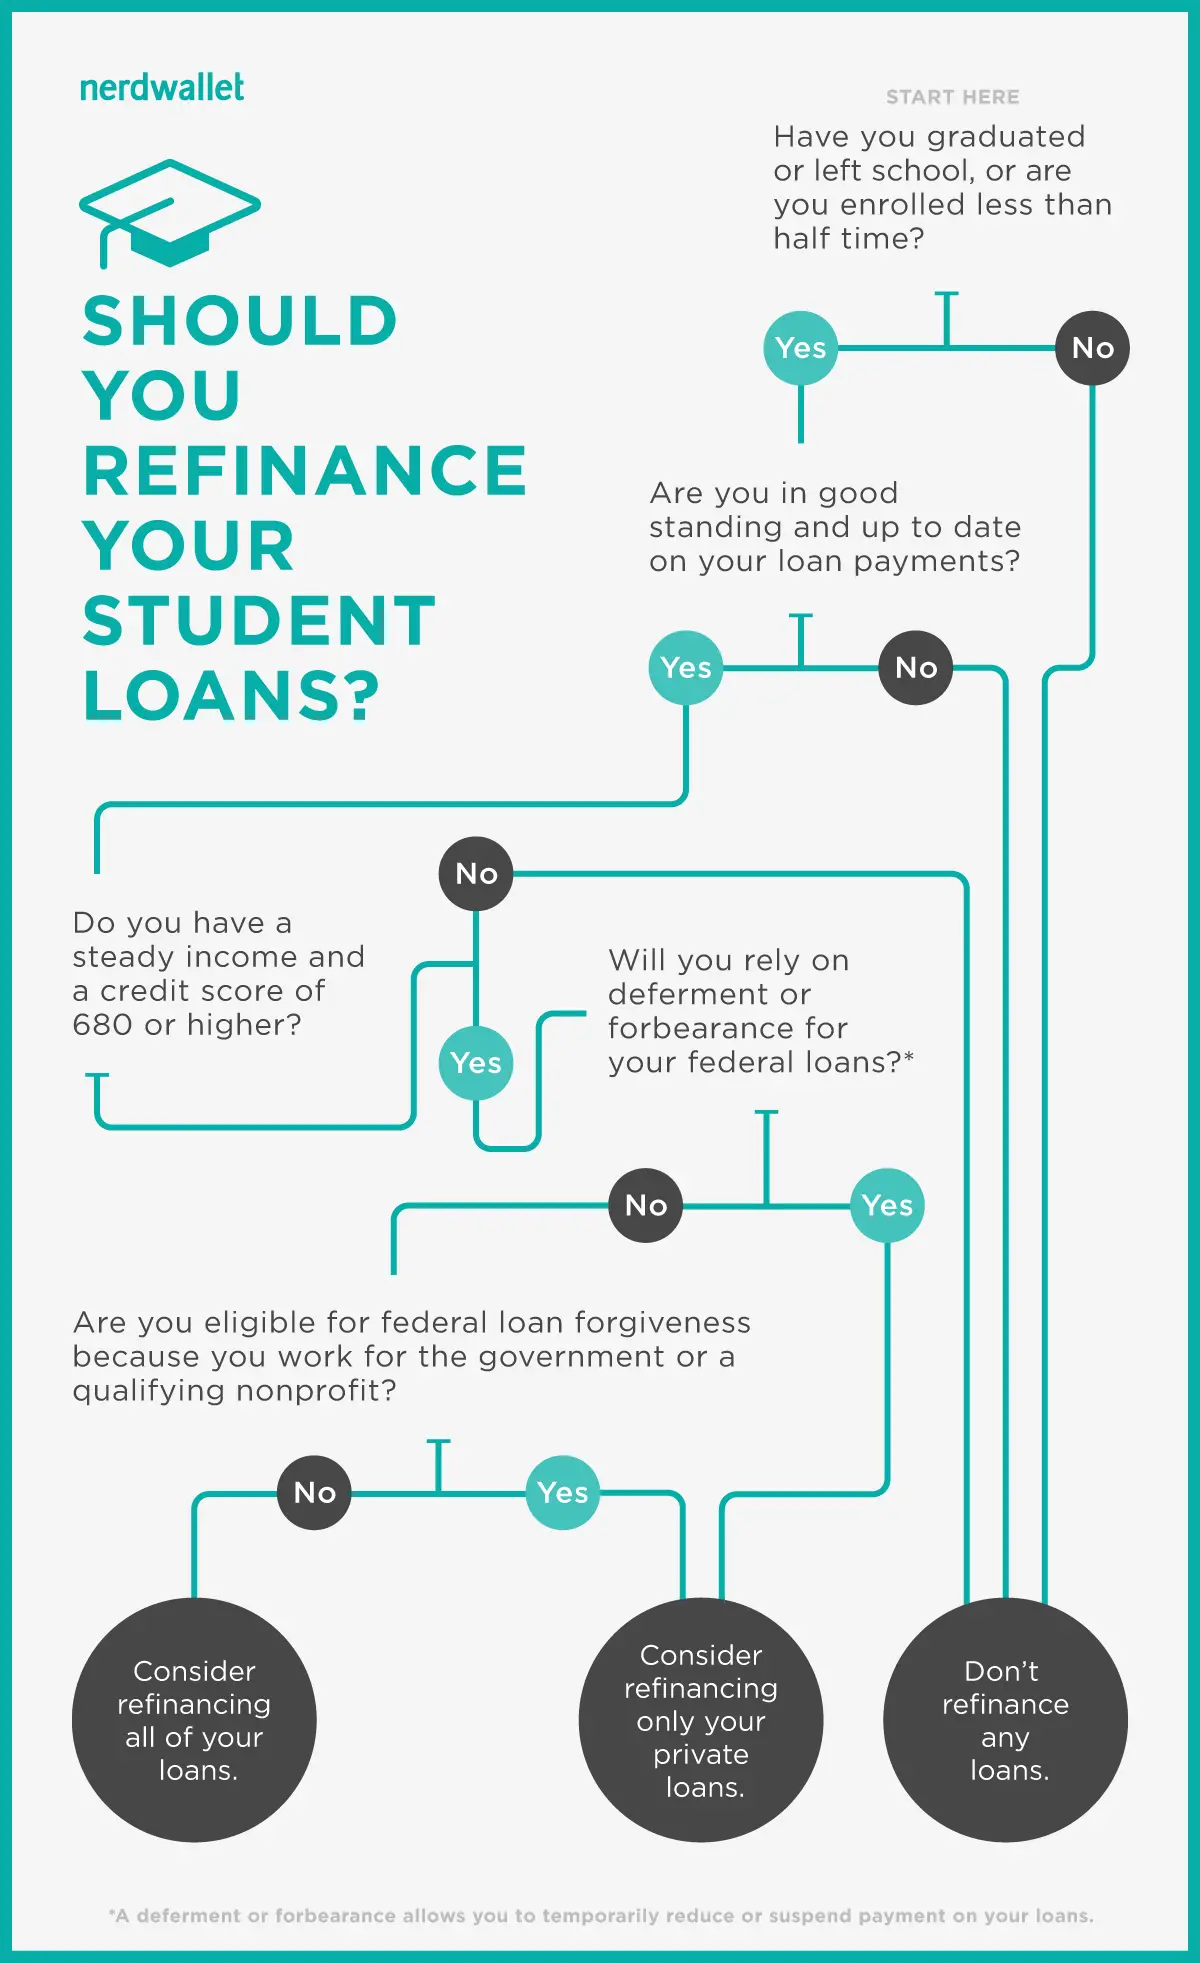 Use This Infographic to Decide If You Should Refinance Your Student ...